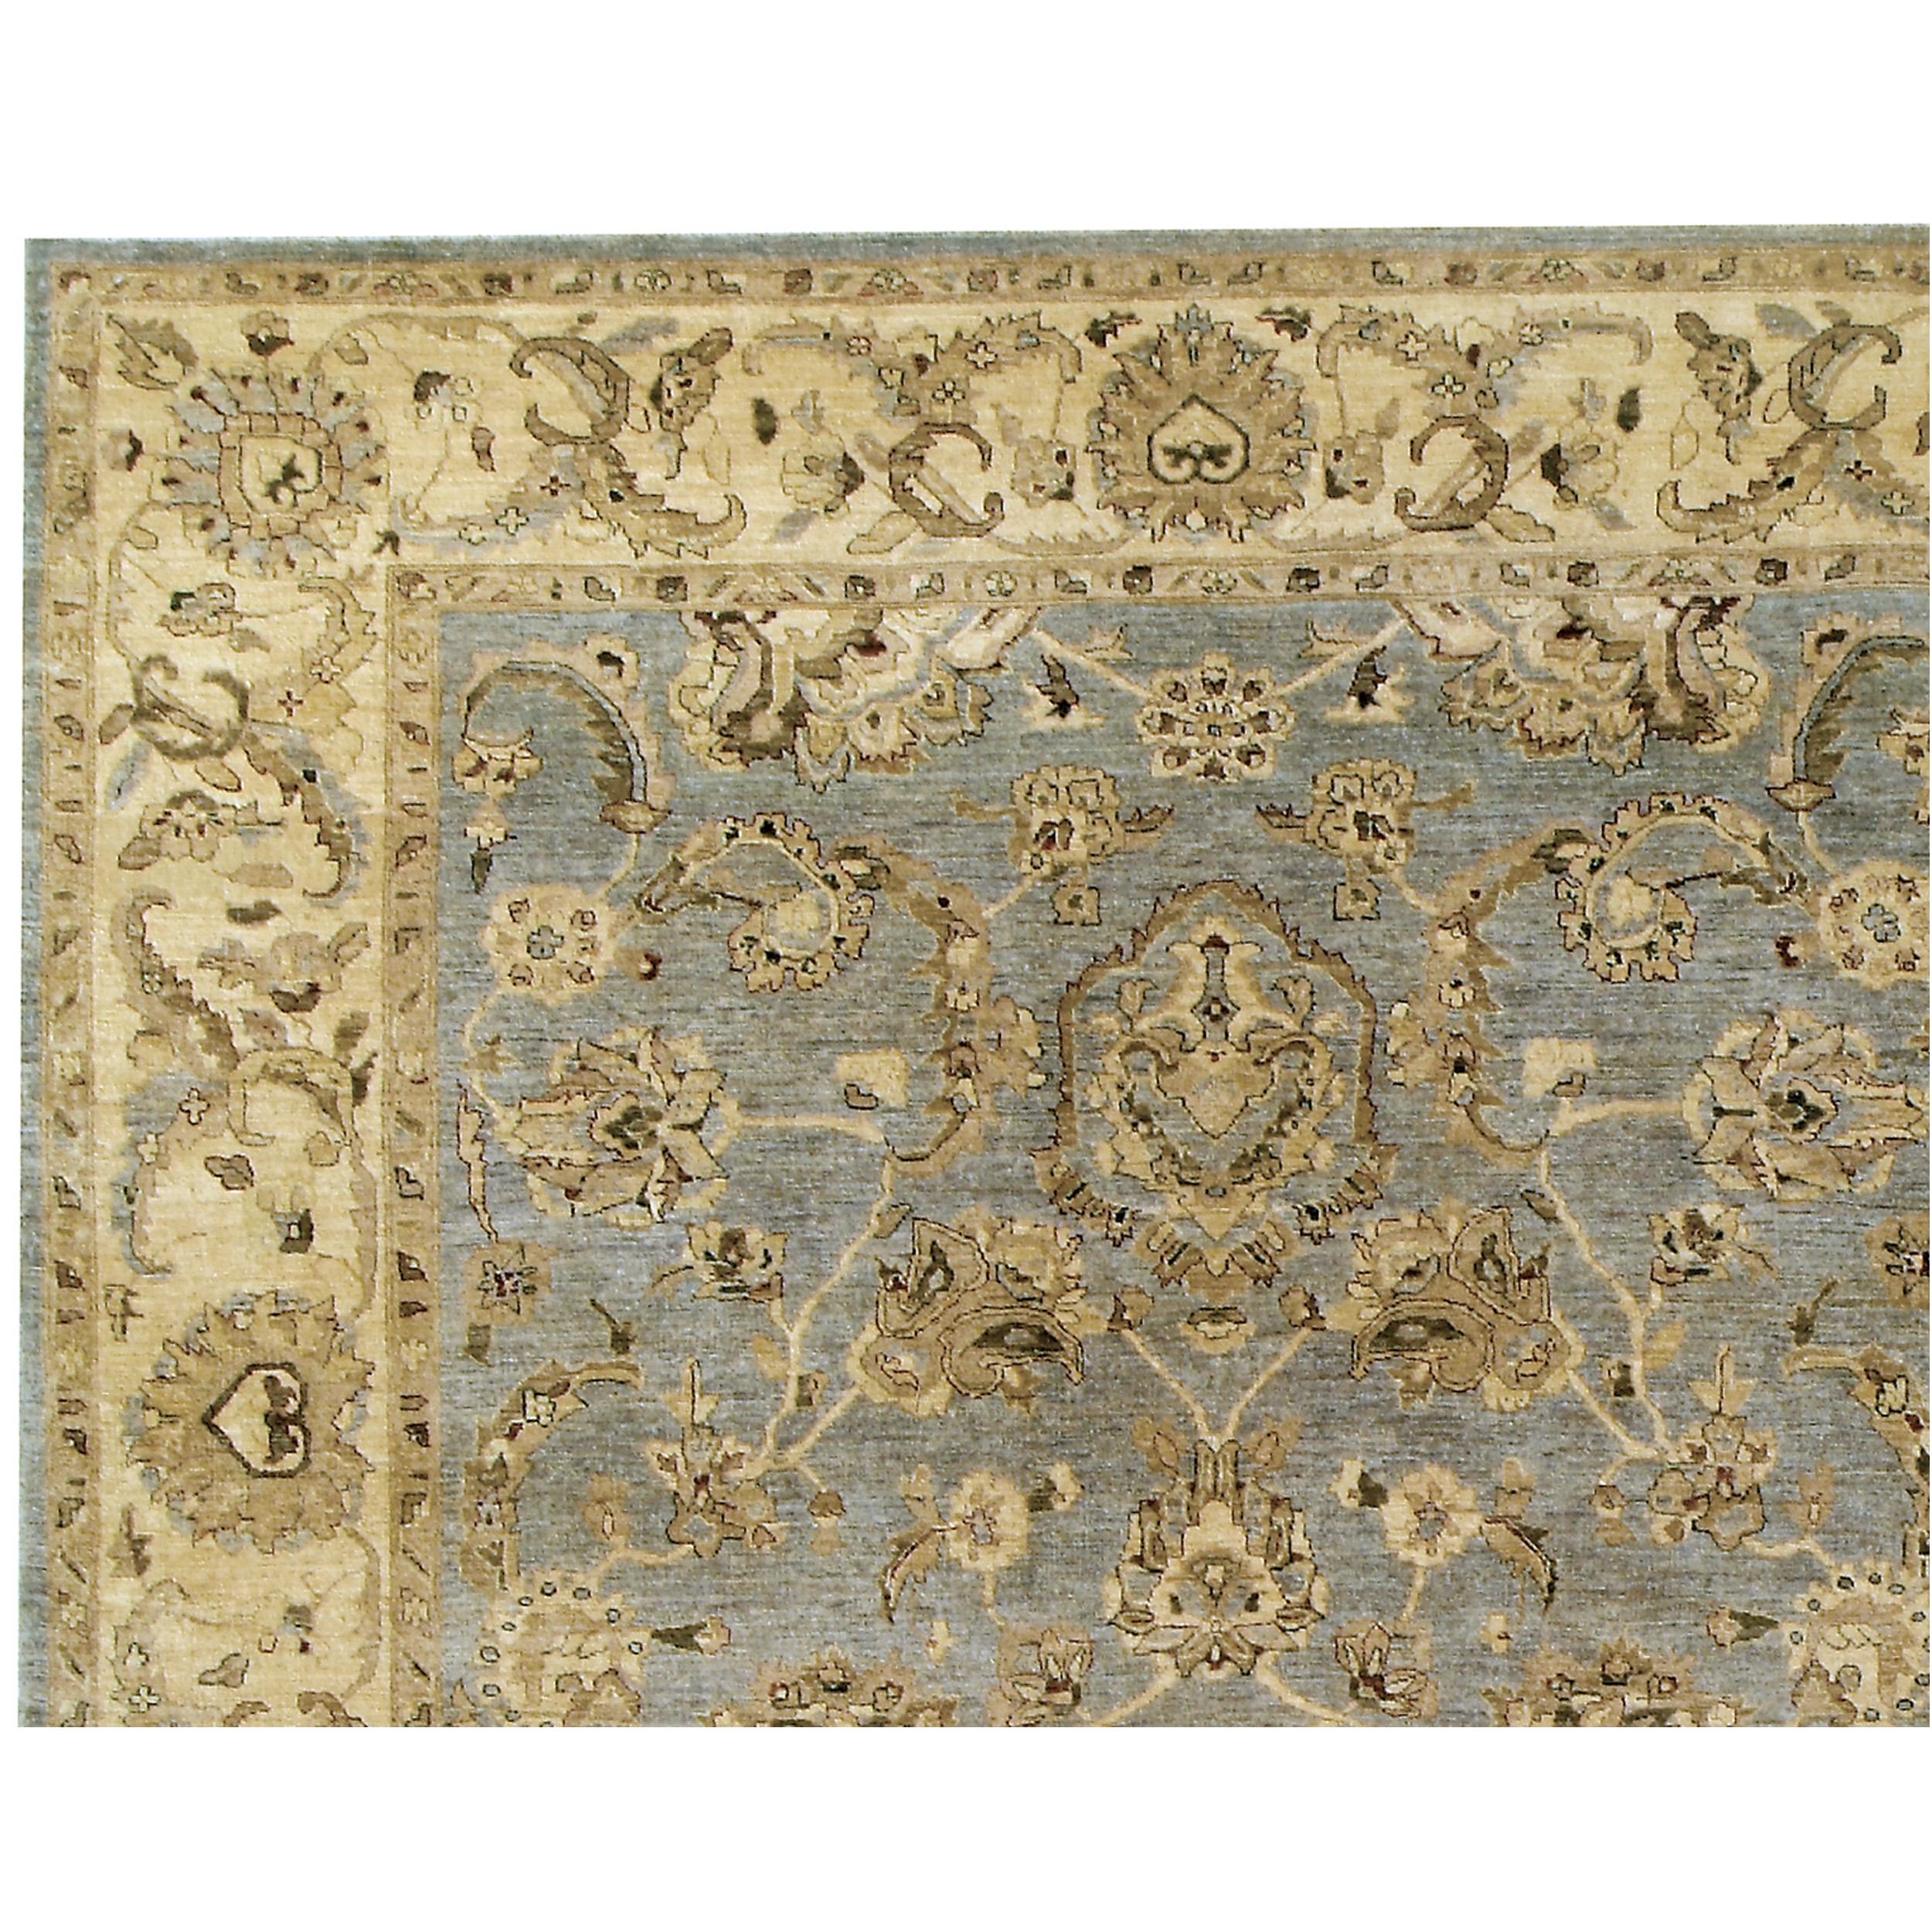 This exquisite handwoven rug hails from the masterful artisans of Pakistan, where generations of weaving expertise and a profound appreciation for the art of rug making come together. Using only the most premium wool that was carefully sourced to